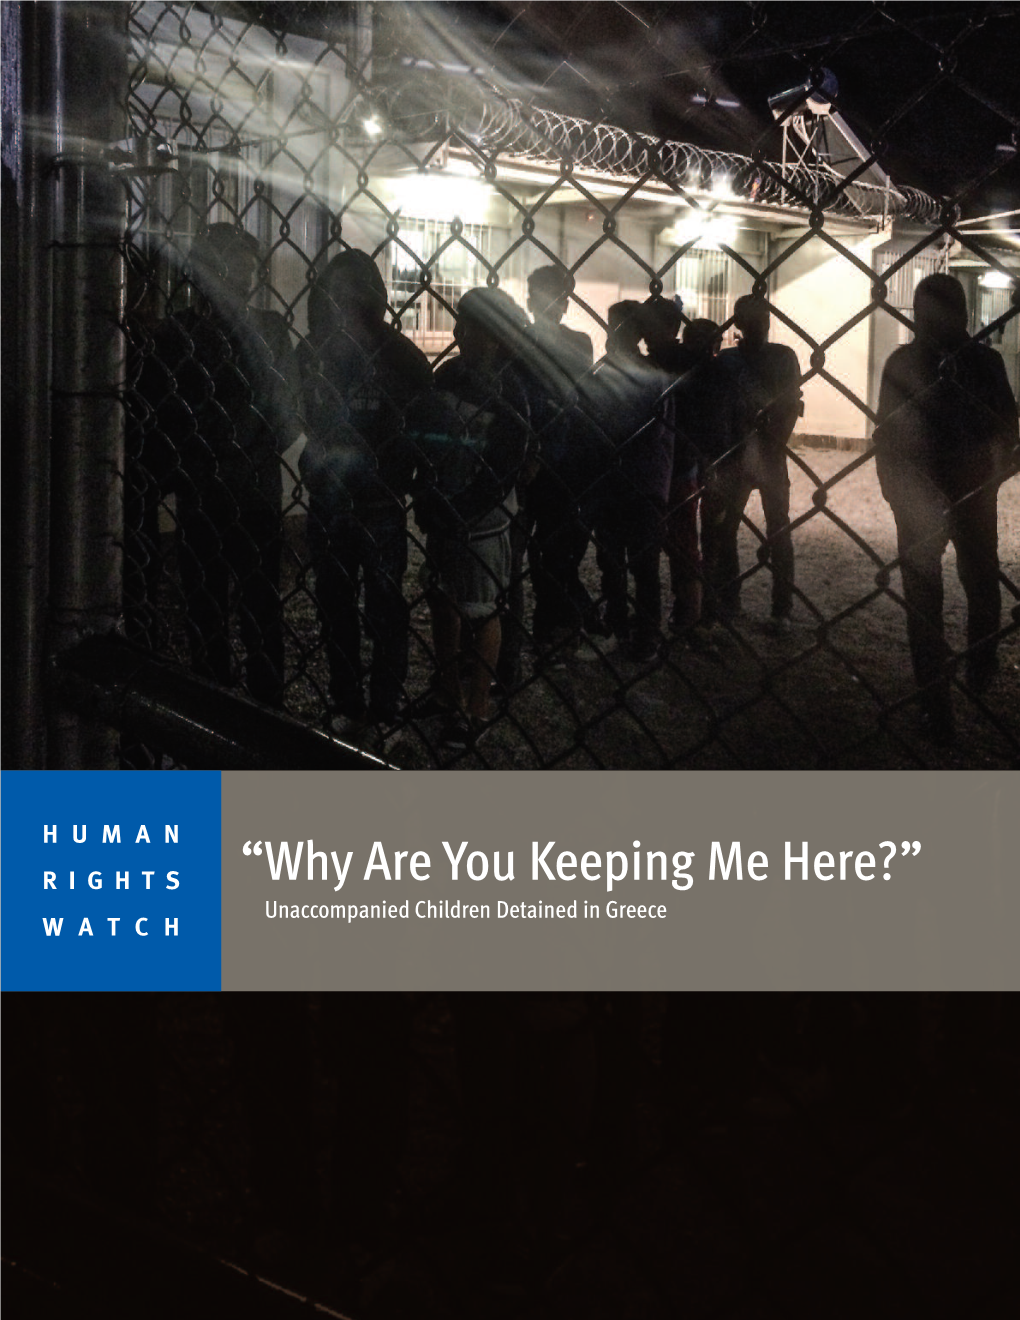 “Why Are You Keeping Me Here?” Unaccompanied Children Detained in Greece WATCH